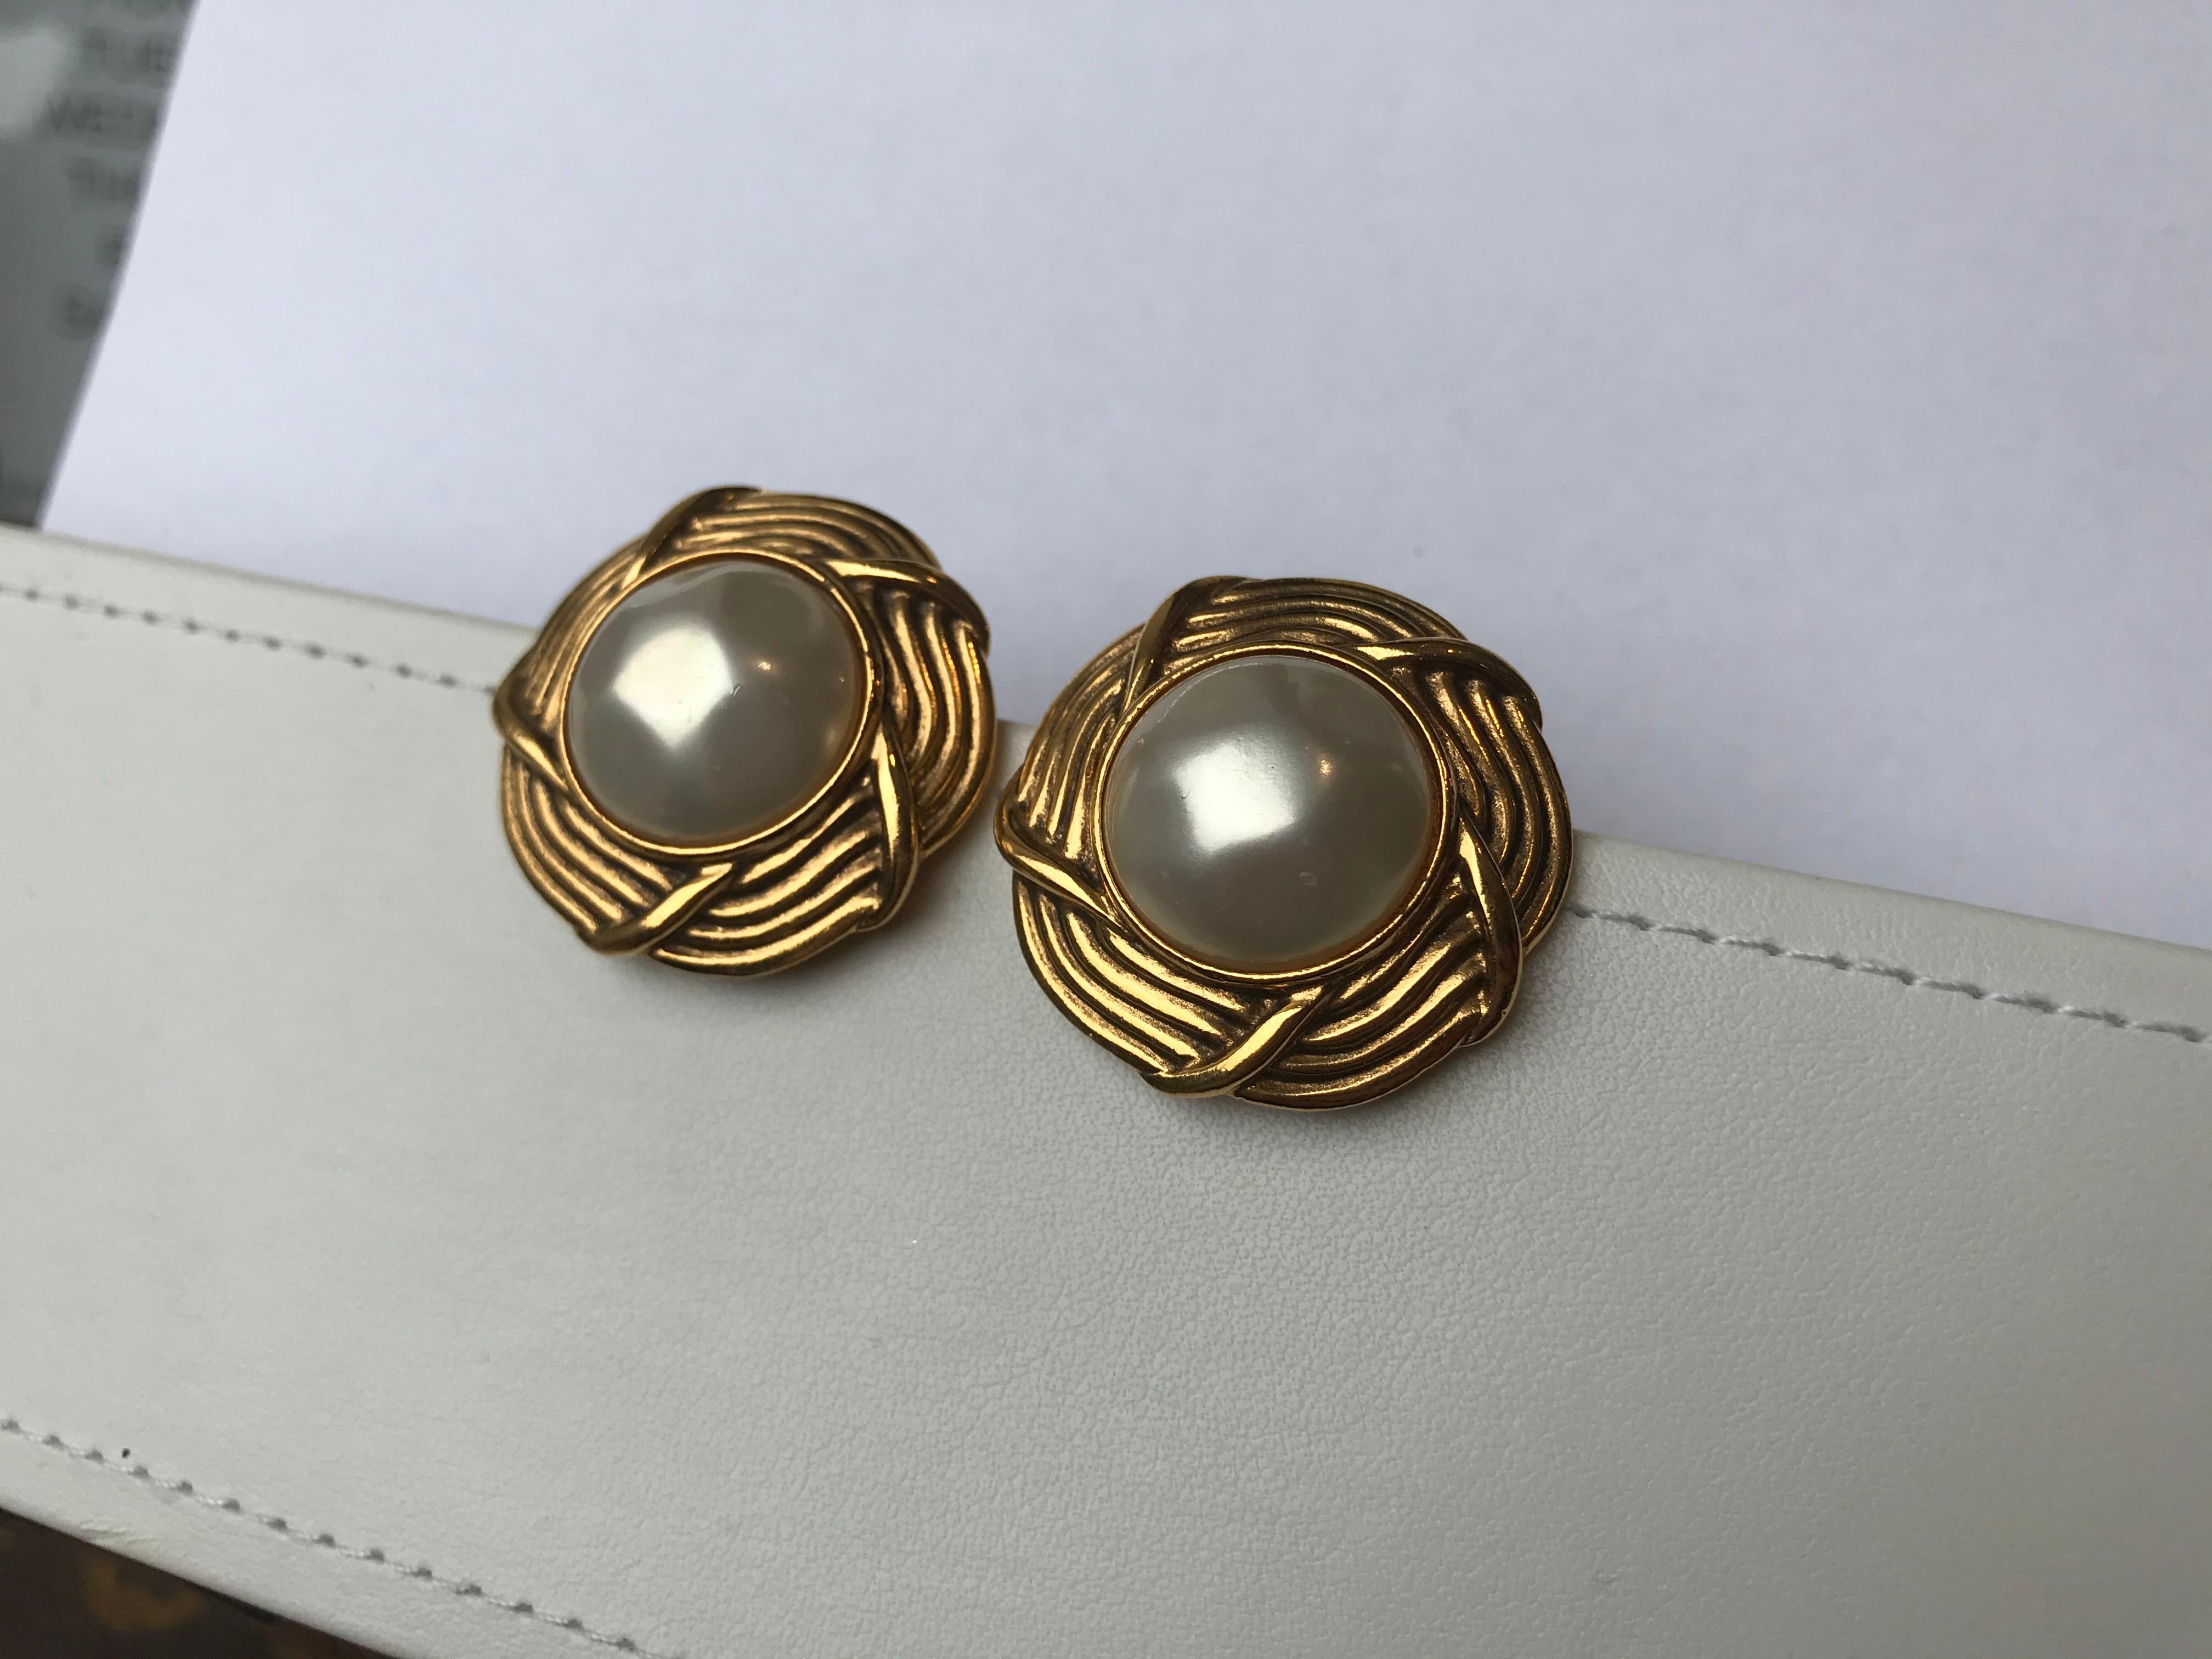 Chanel Vintage Faux Pearl Clip-On Earrings In Good Condition For Sale In Roslyn, NY